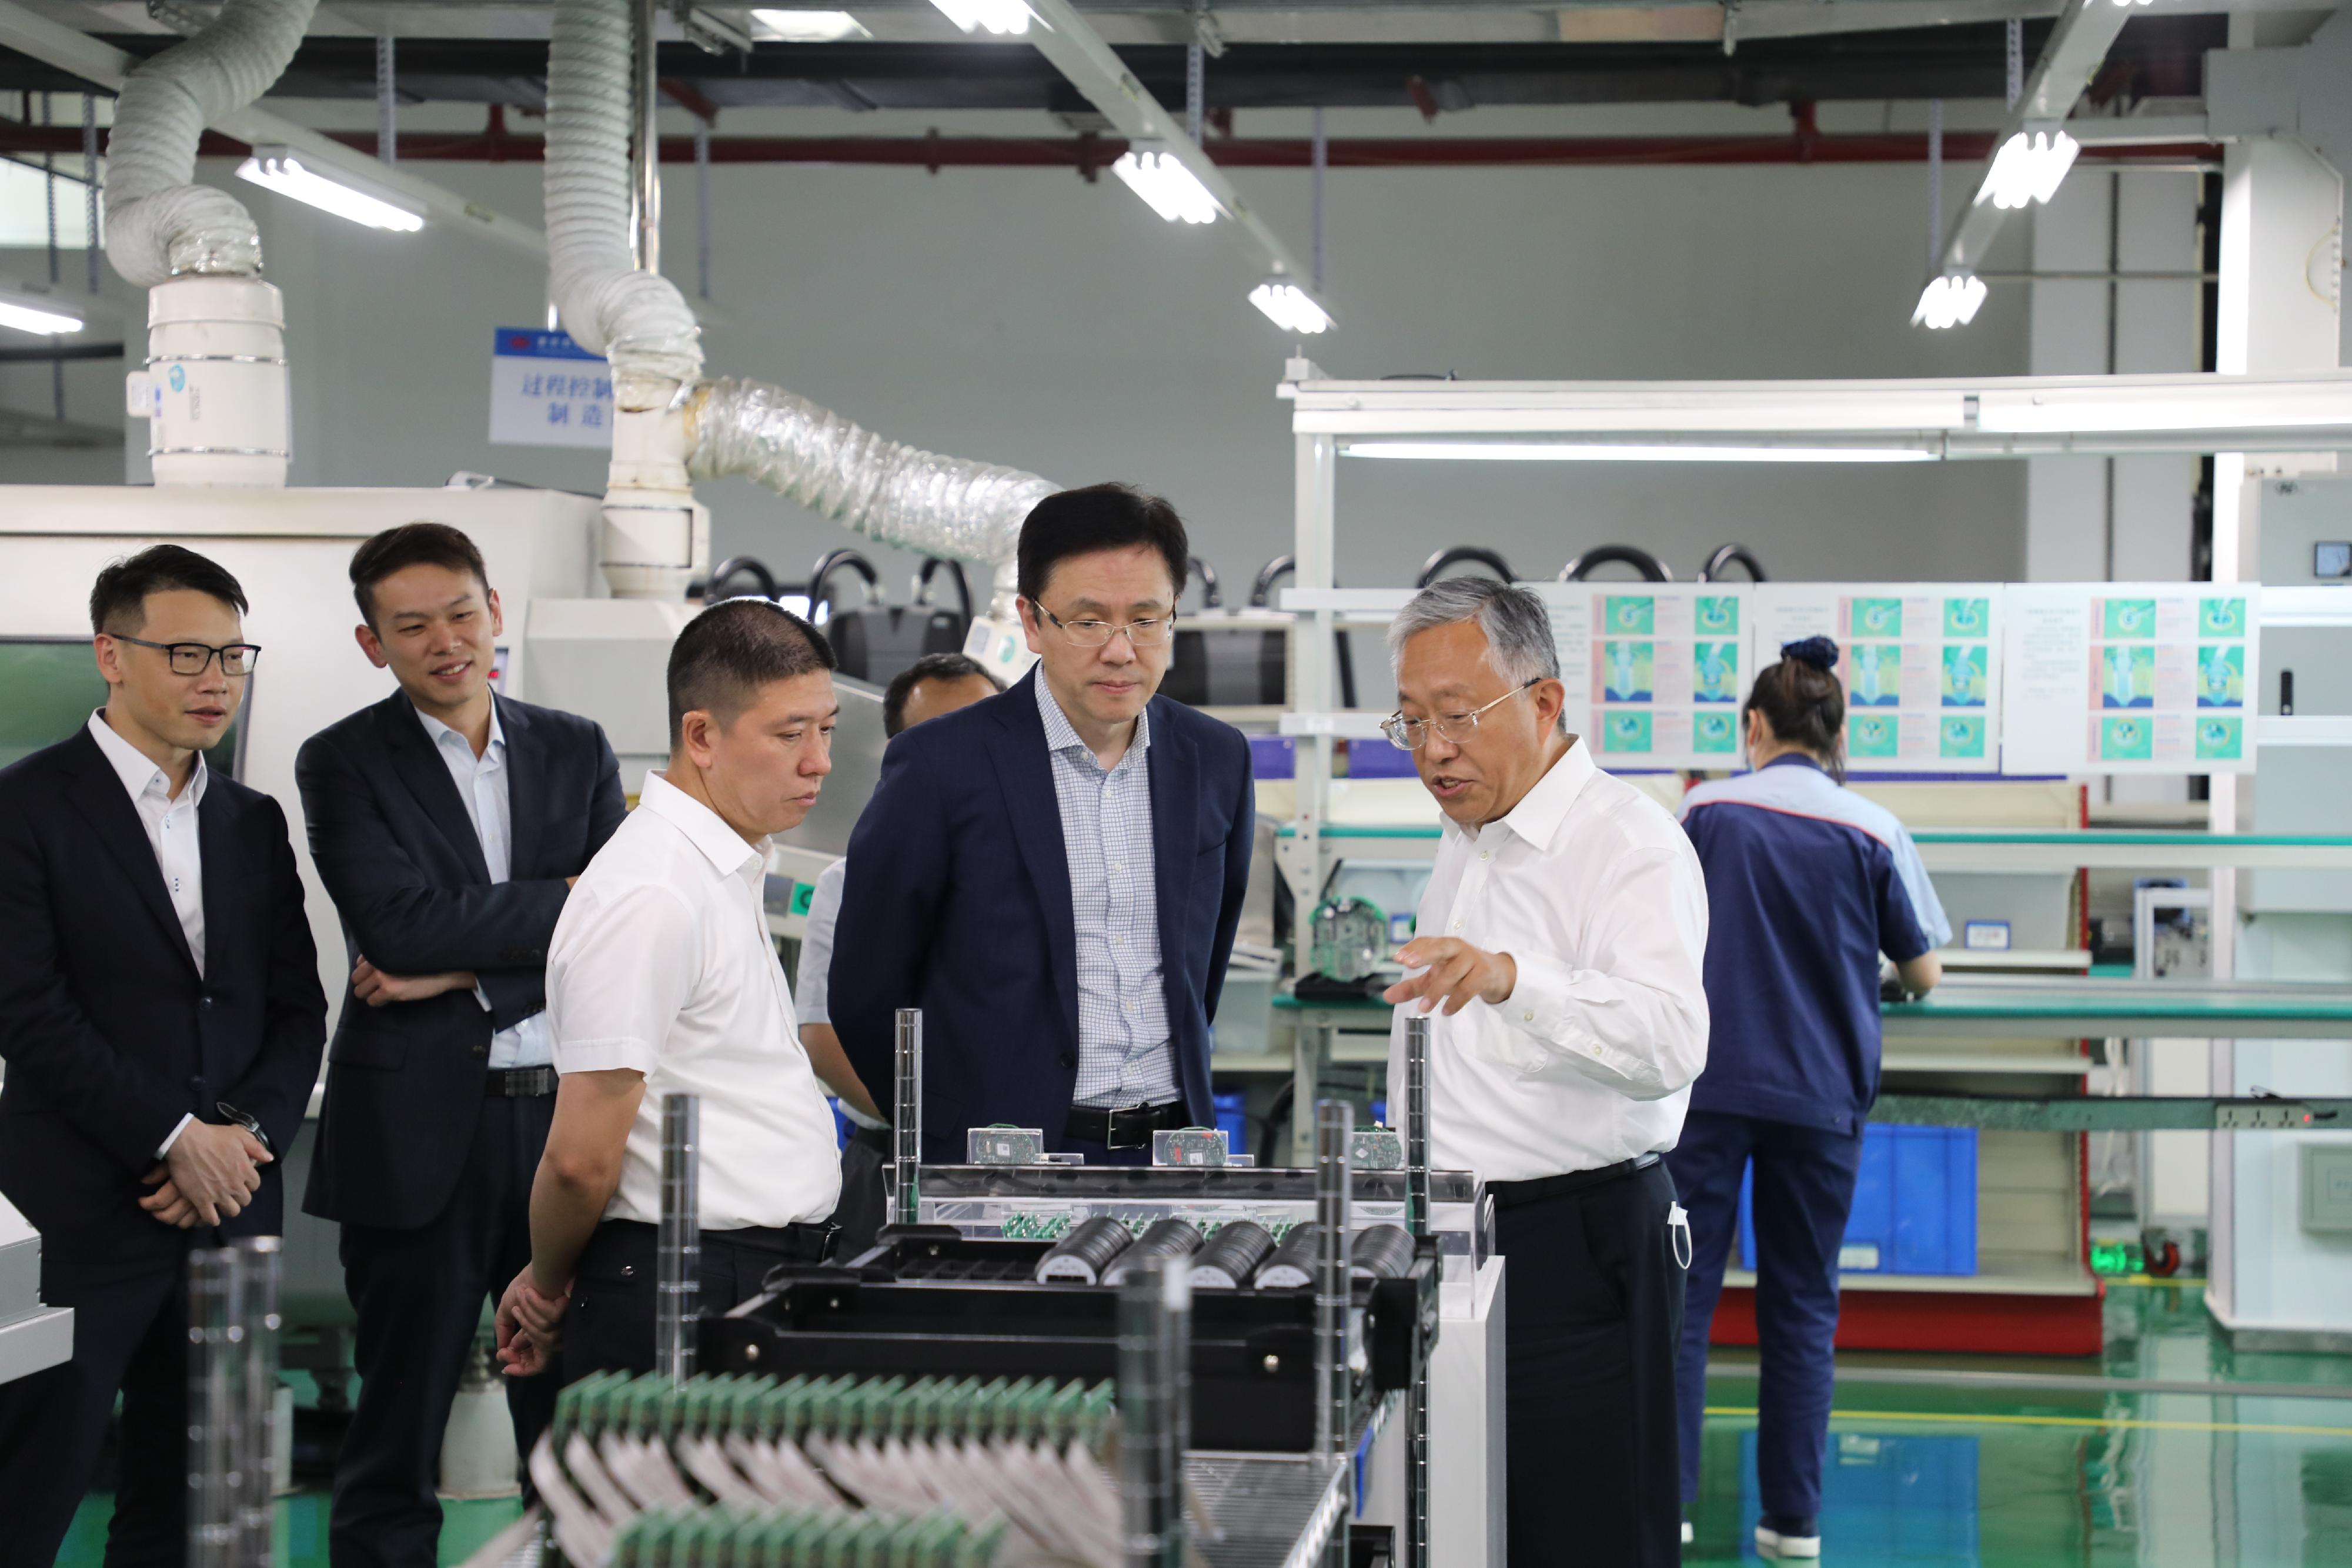 The Secretary for Innovation, Technology and Industry, Professor Sun Dong (second right), tours the smart production lines of the Chongqing Silian Measure & Control Technology Company Limited today (May 12) in Chongqing to learn about the operation of the production lines. Looking on is the Group's Party Secretary and Chairman, Mr Tian Shanbin (third left).